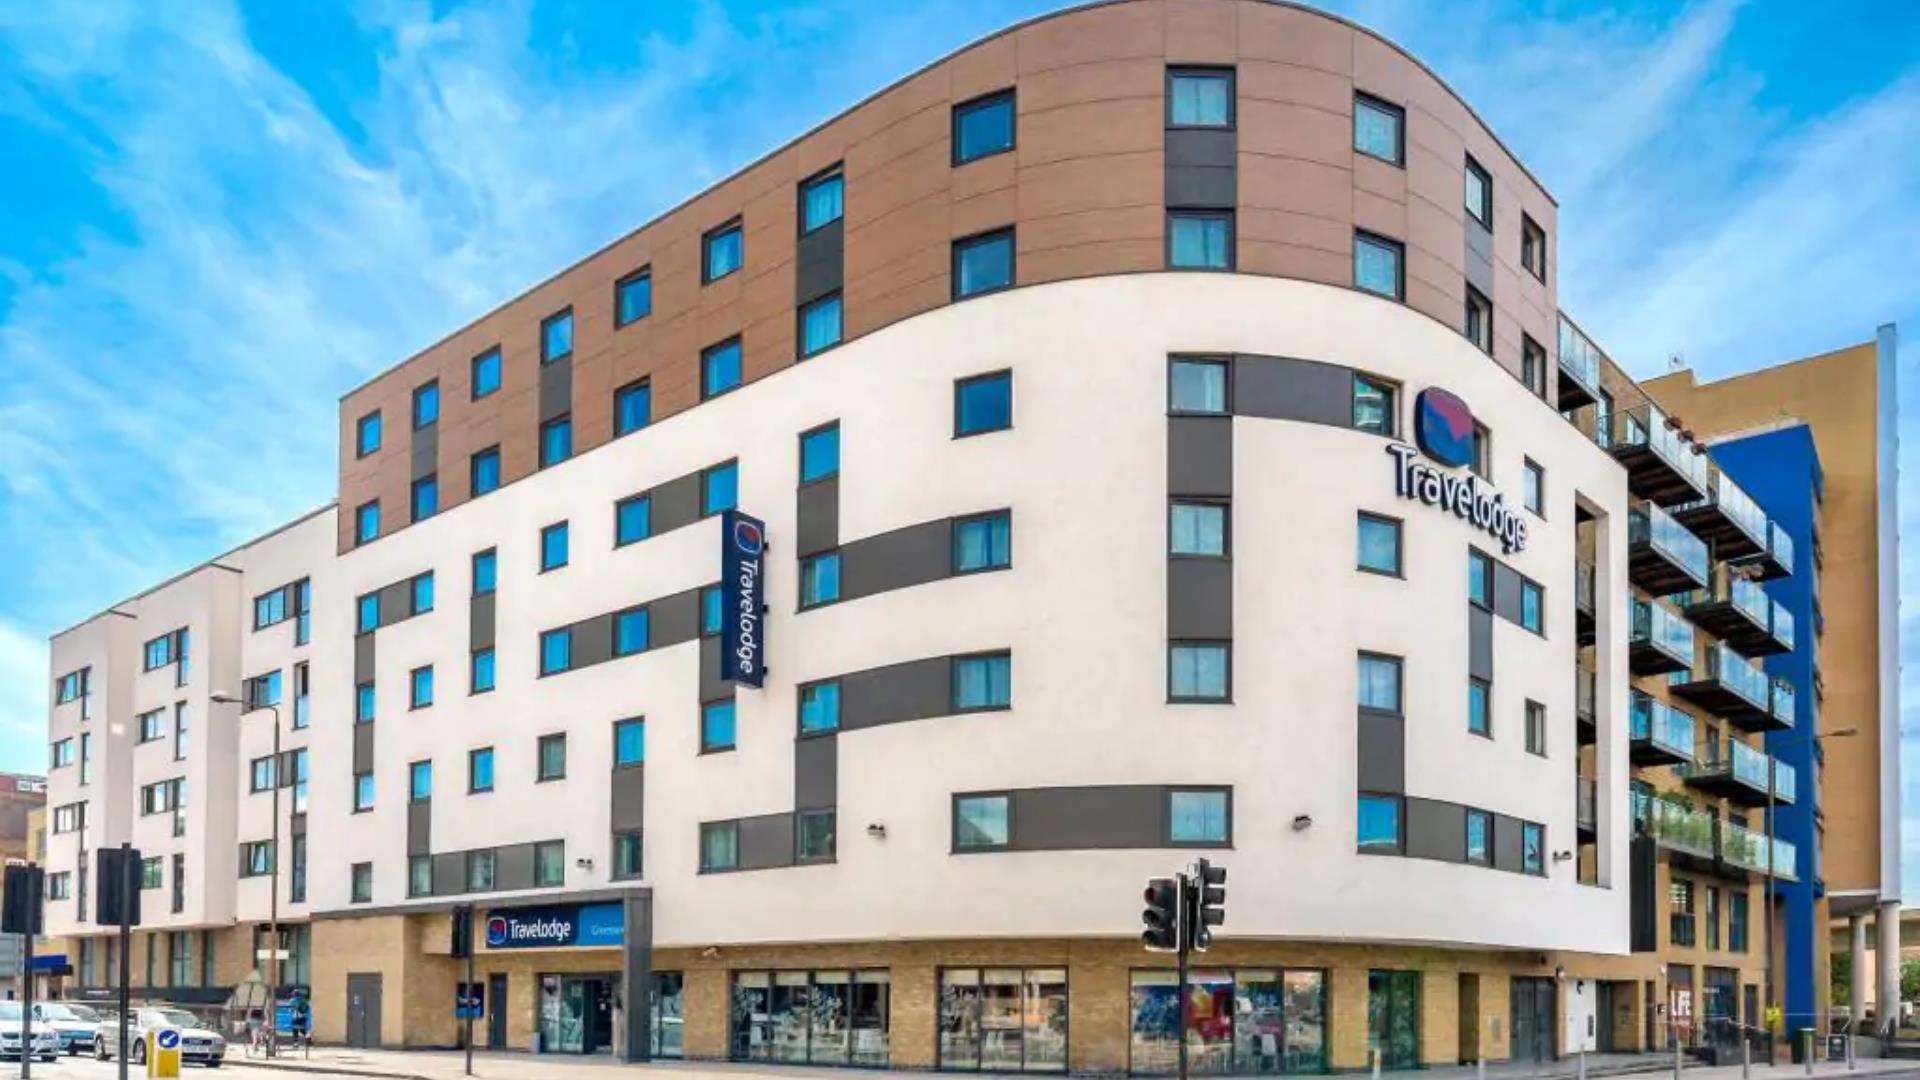 The exterior of the new Travelodge budget hotel in Greenwich, London.